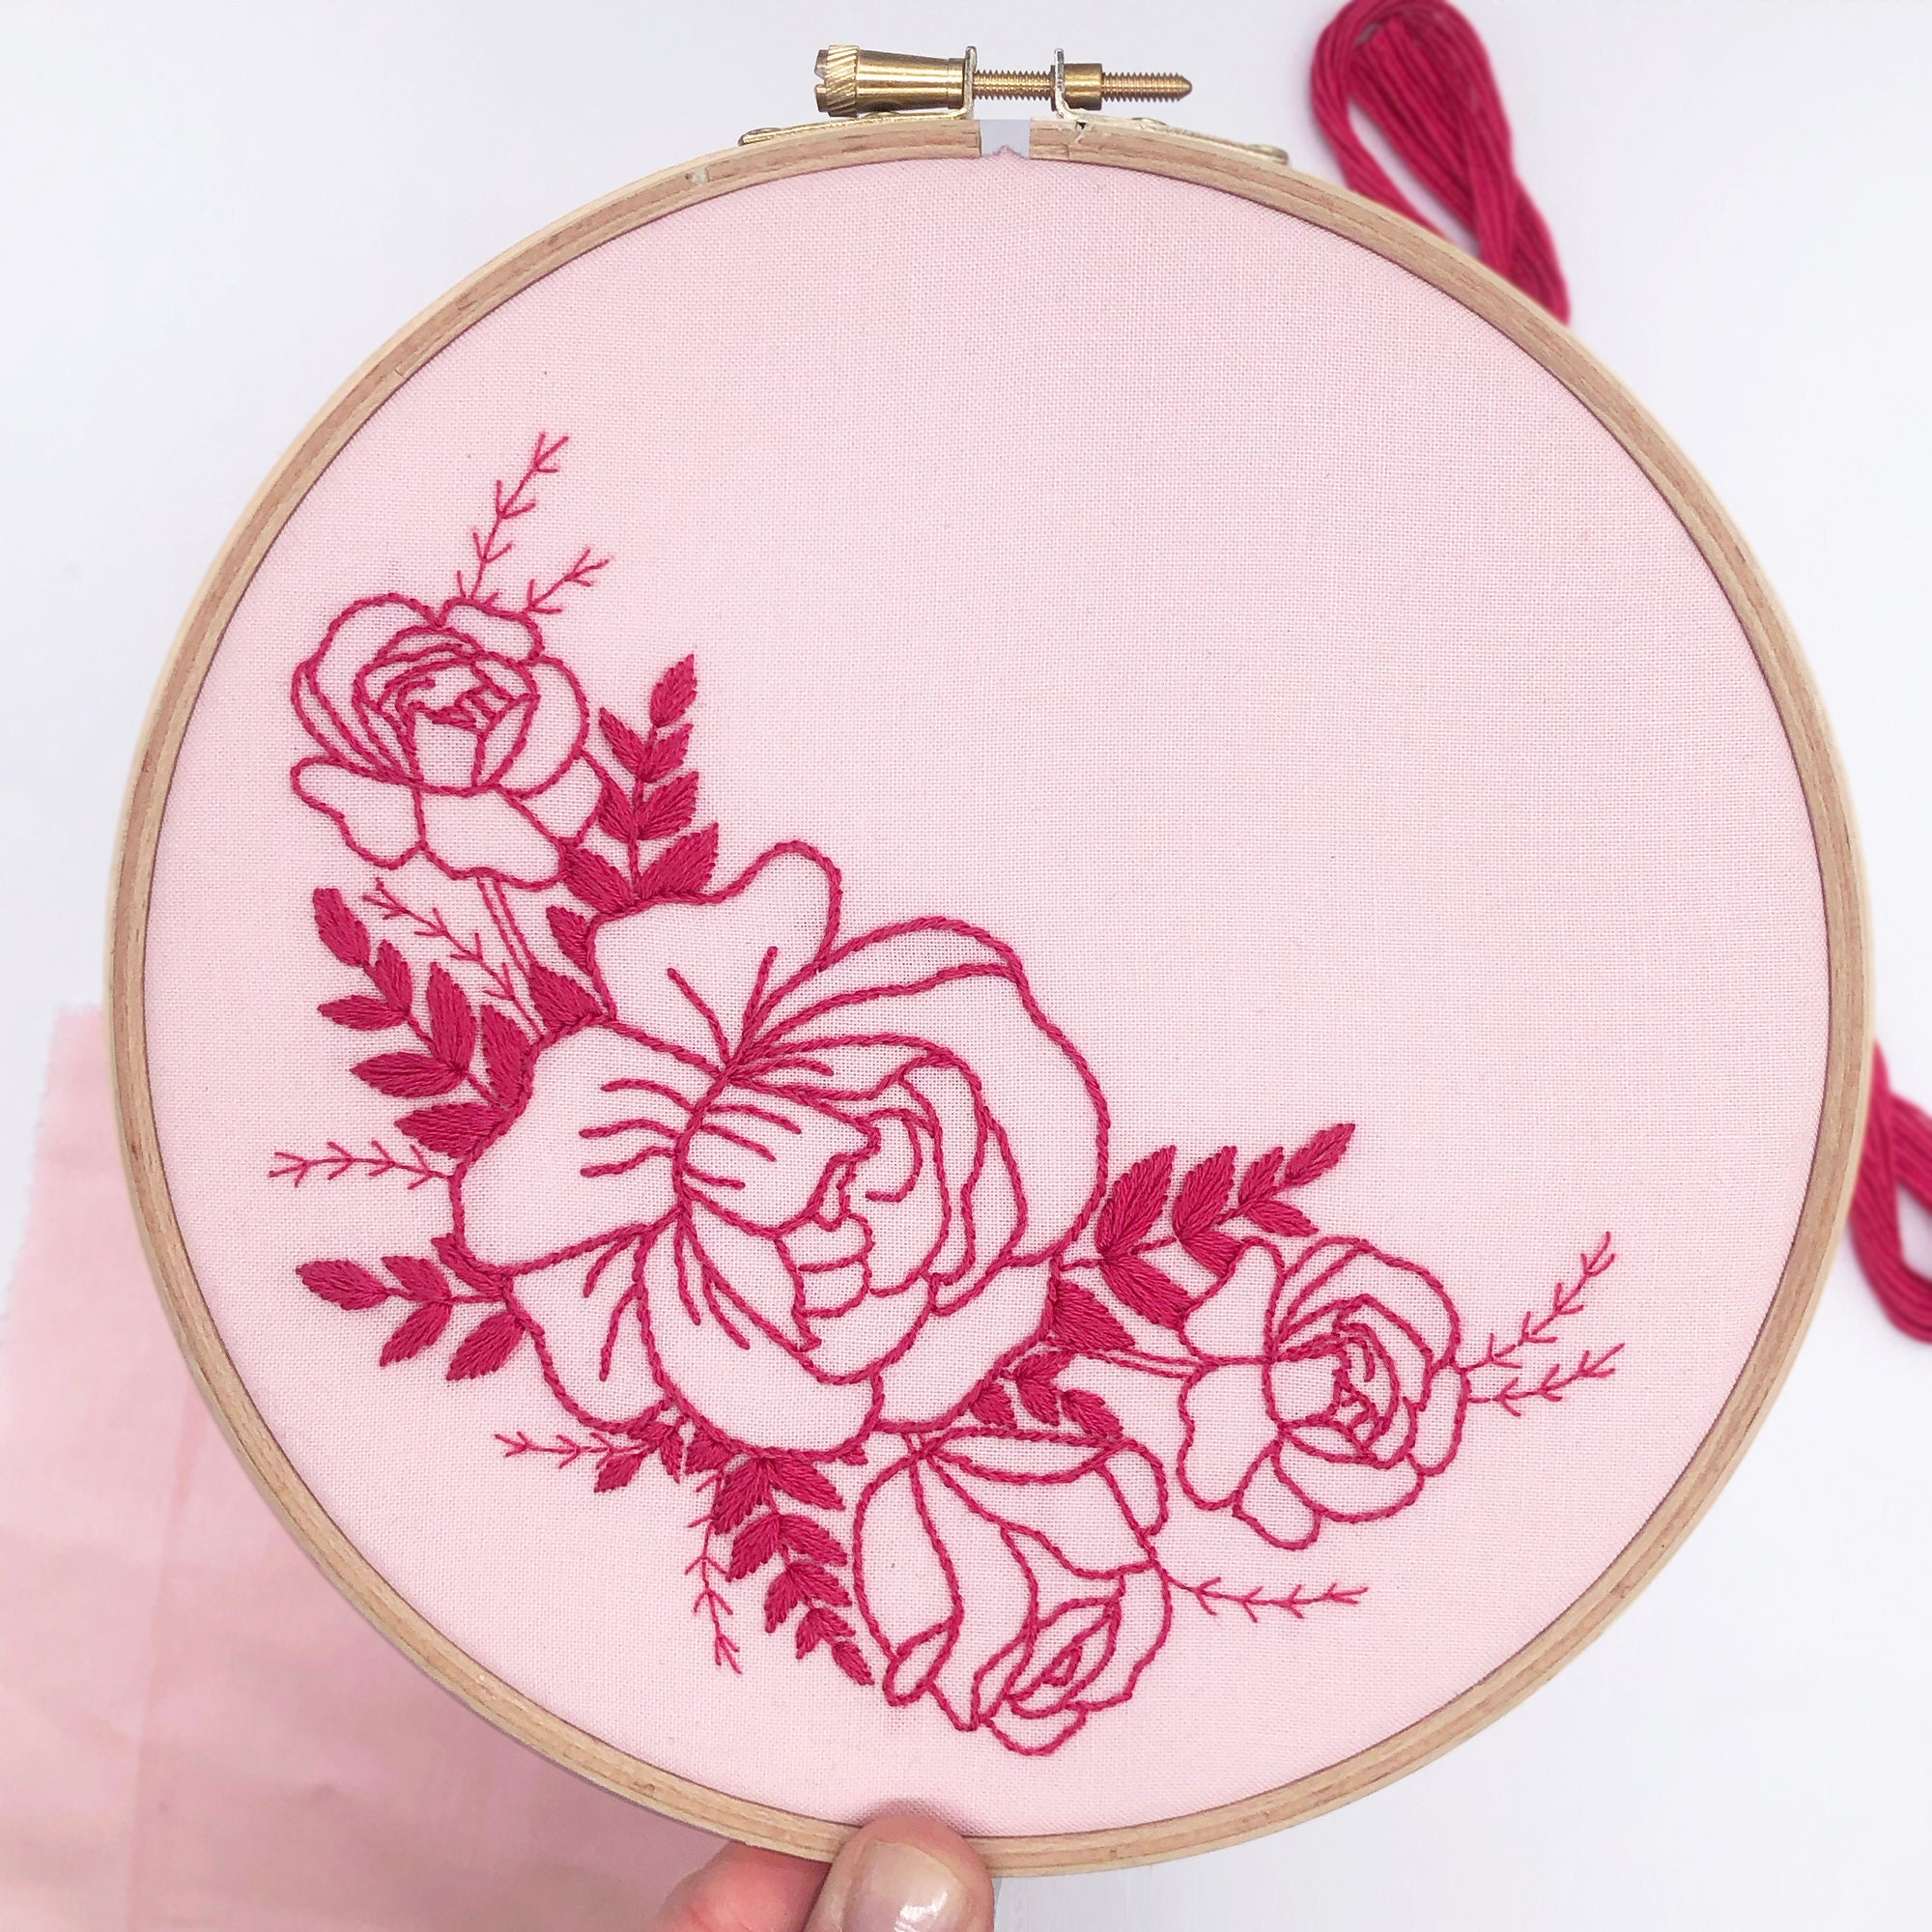 Hand Embroidery Kit, Floral Embroidery for Beginners, Wreath